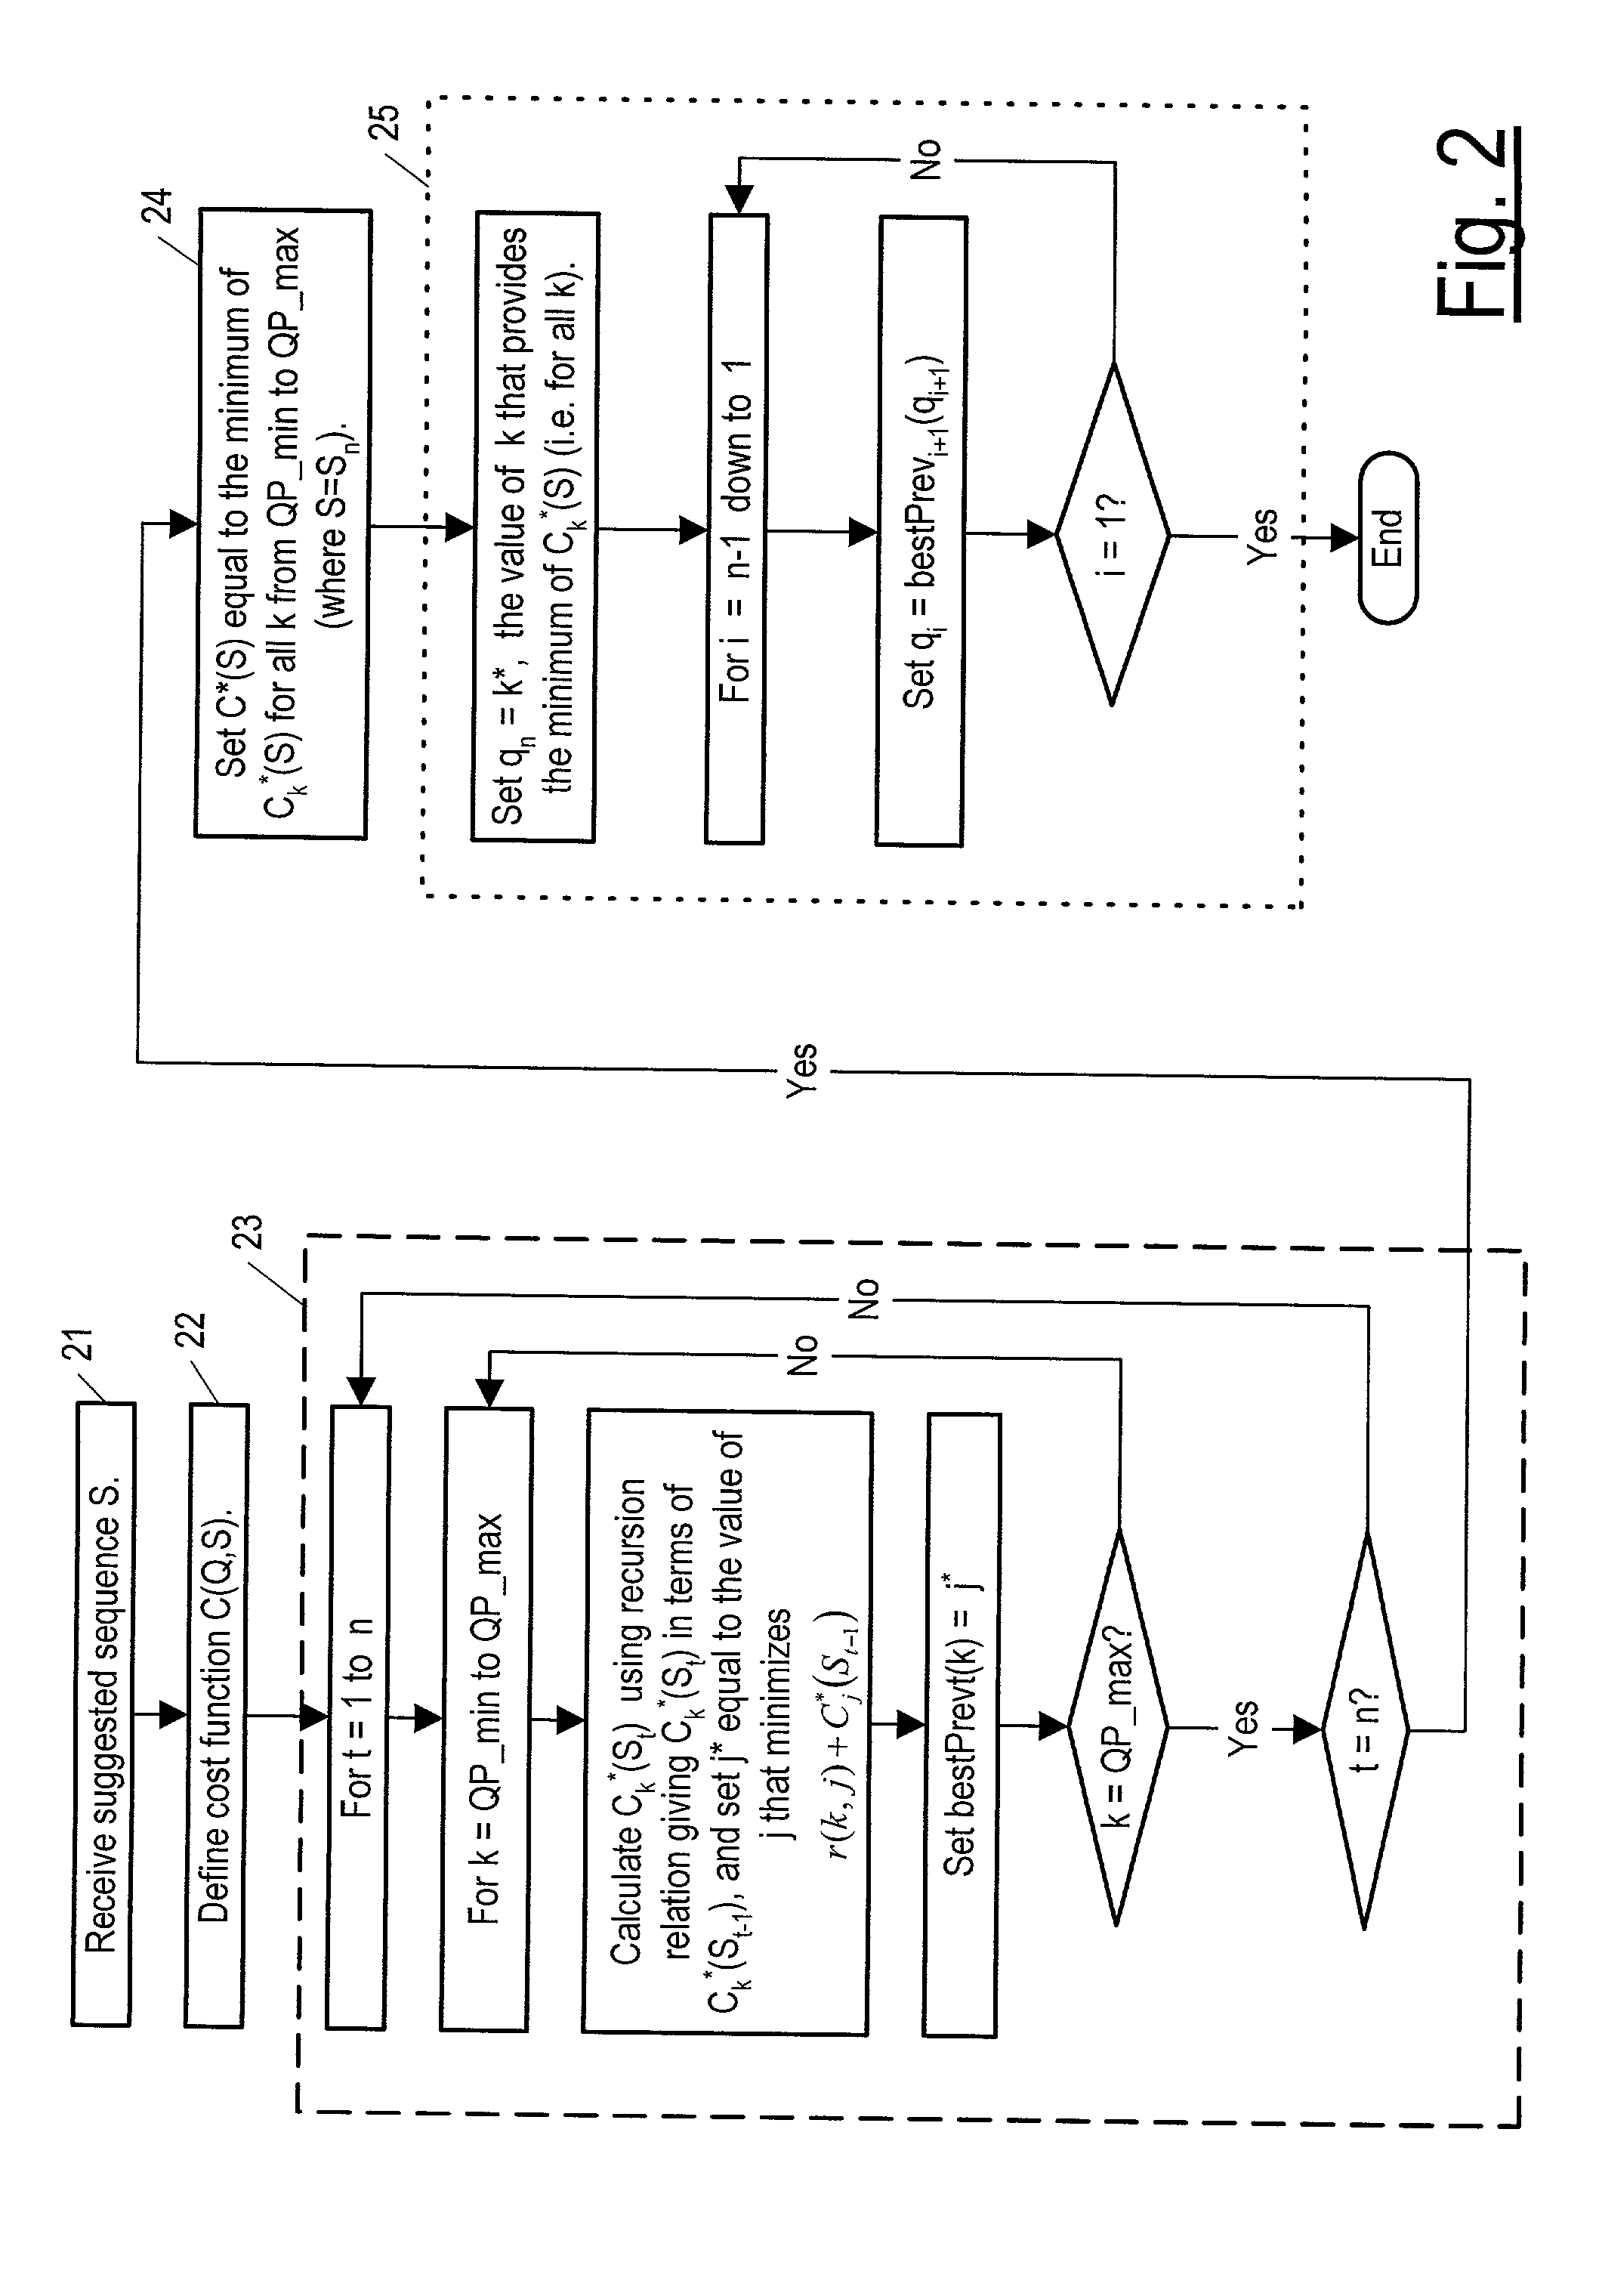 Method and apparatus for selecting macroblock quantization parameters in a video encoder